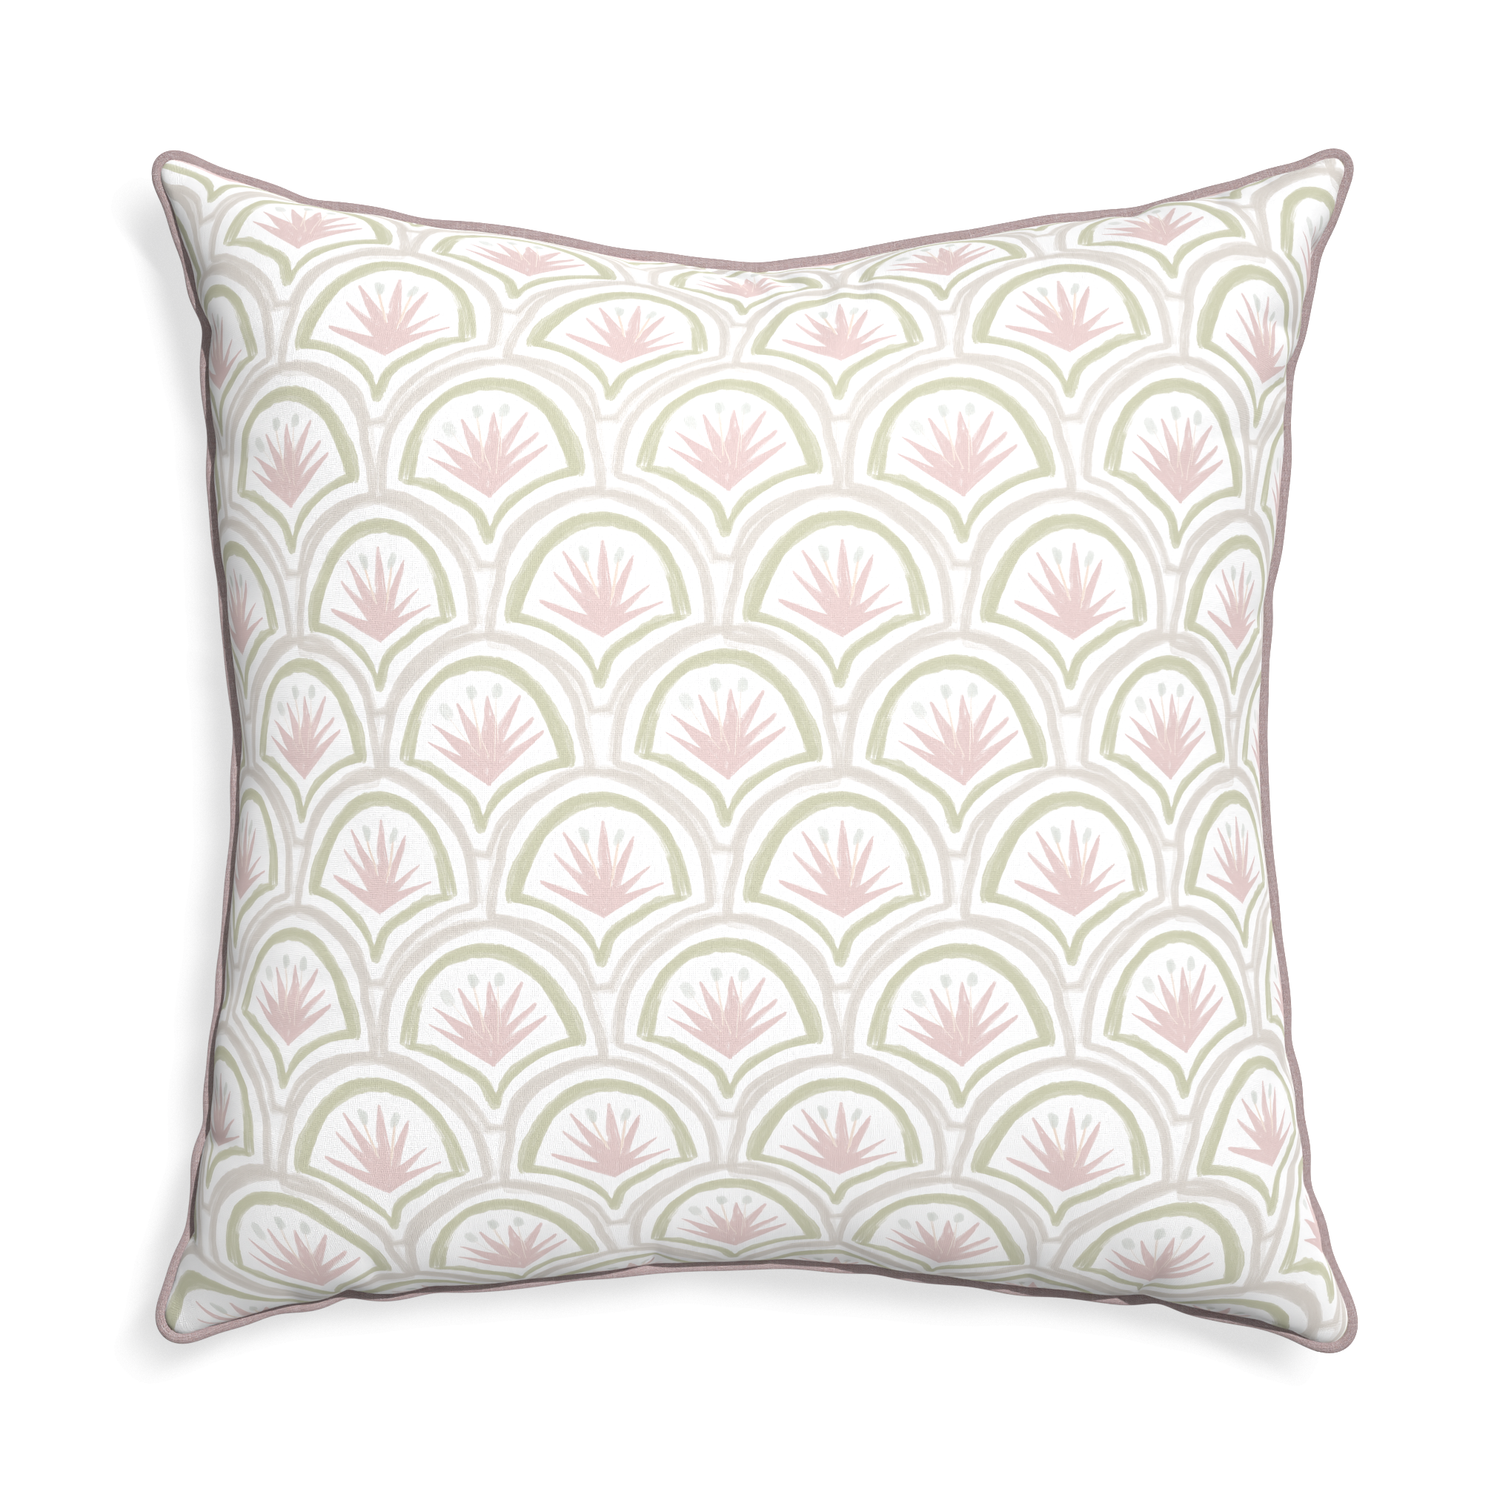 Euro-sham thatcher rose custom pink & green palmpillow with orchid piping on white background